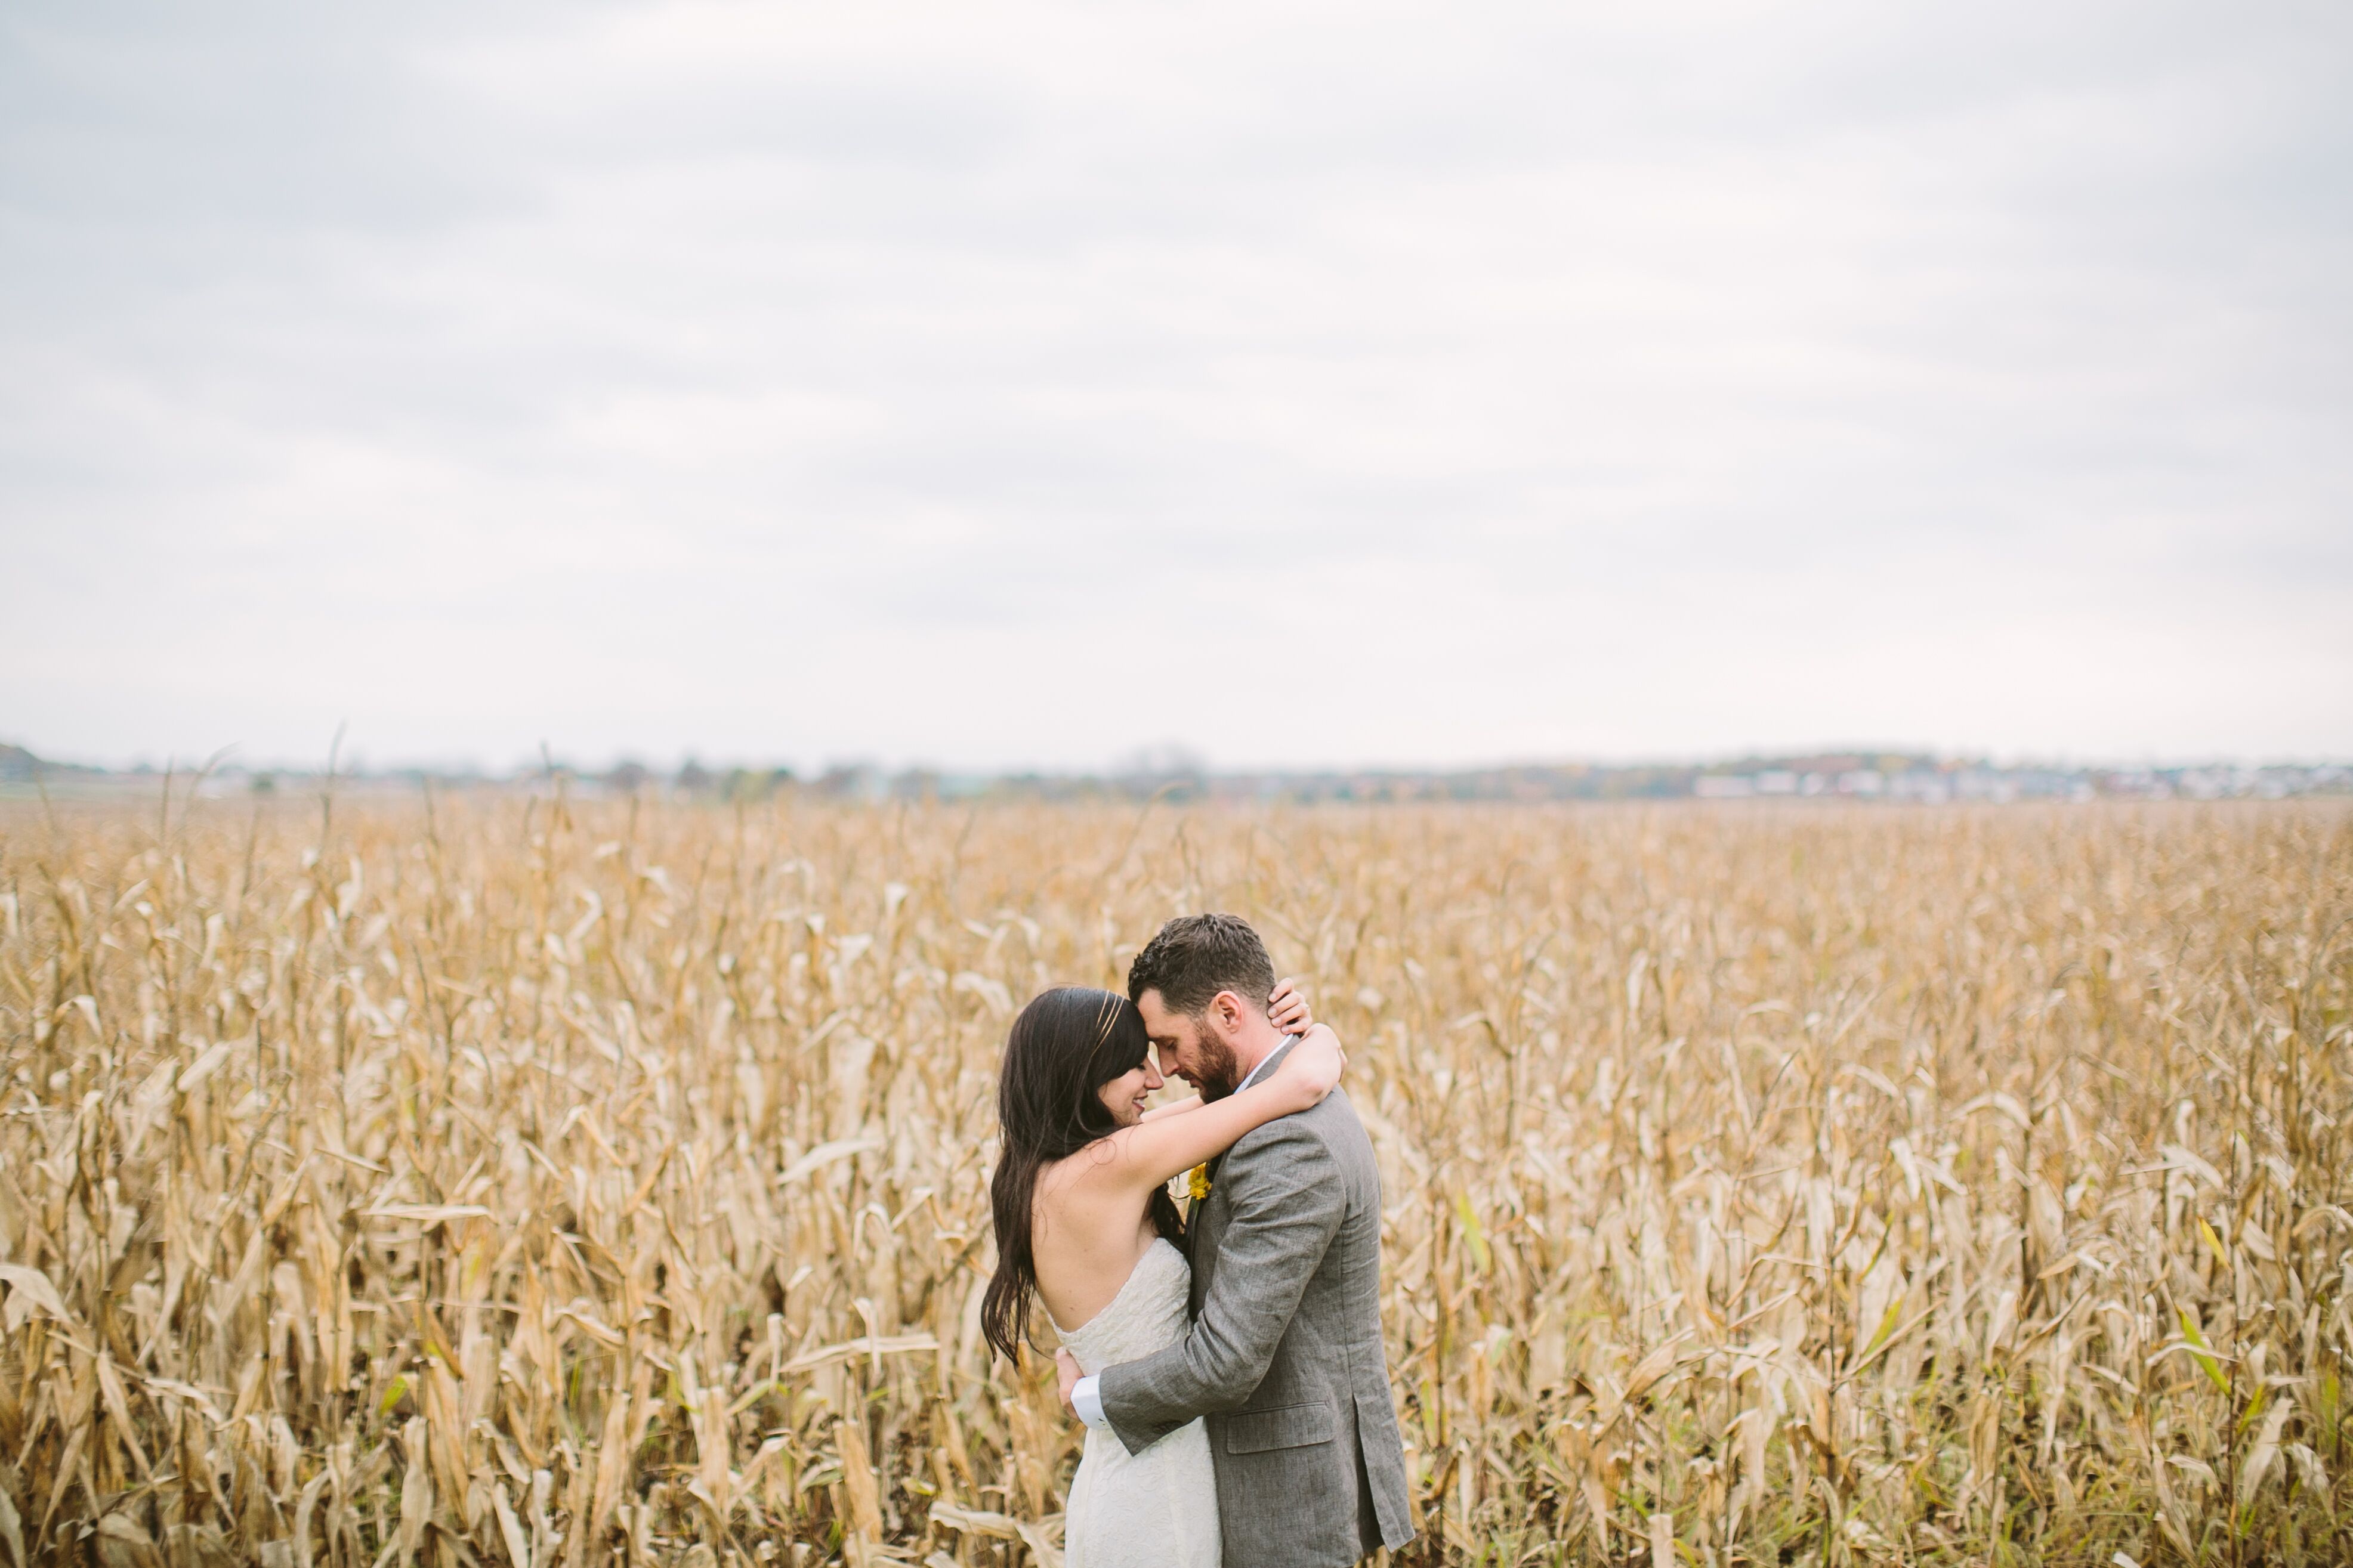 A Vintage Fall Wedding At Emerson Creek Pottery And Tea Room In Oswego Illinois